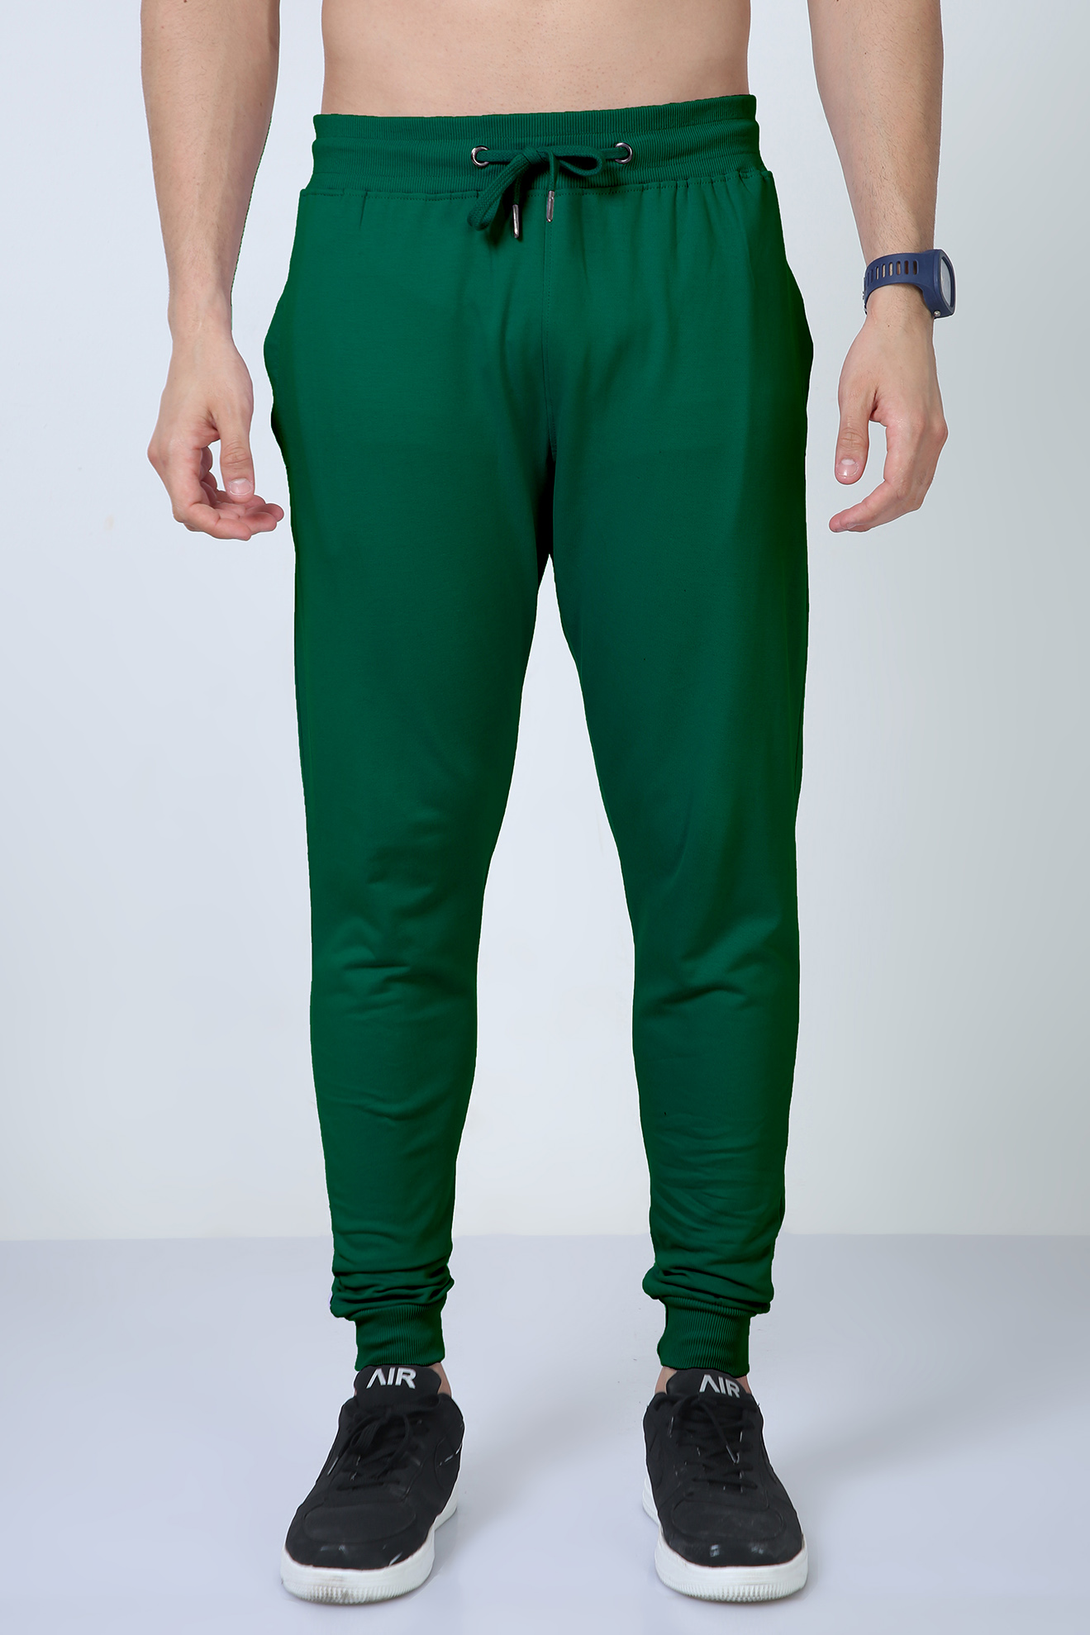 Joggers For Men - WowWaves - 4